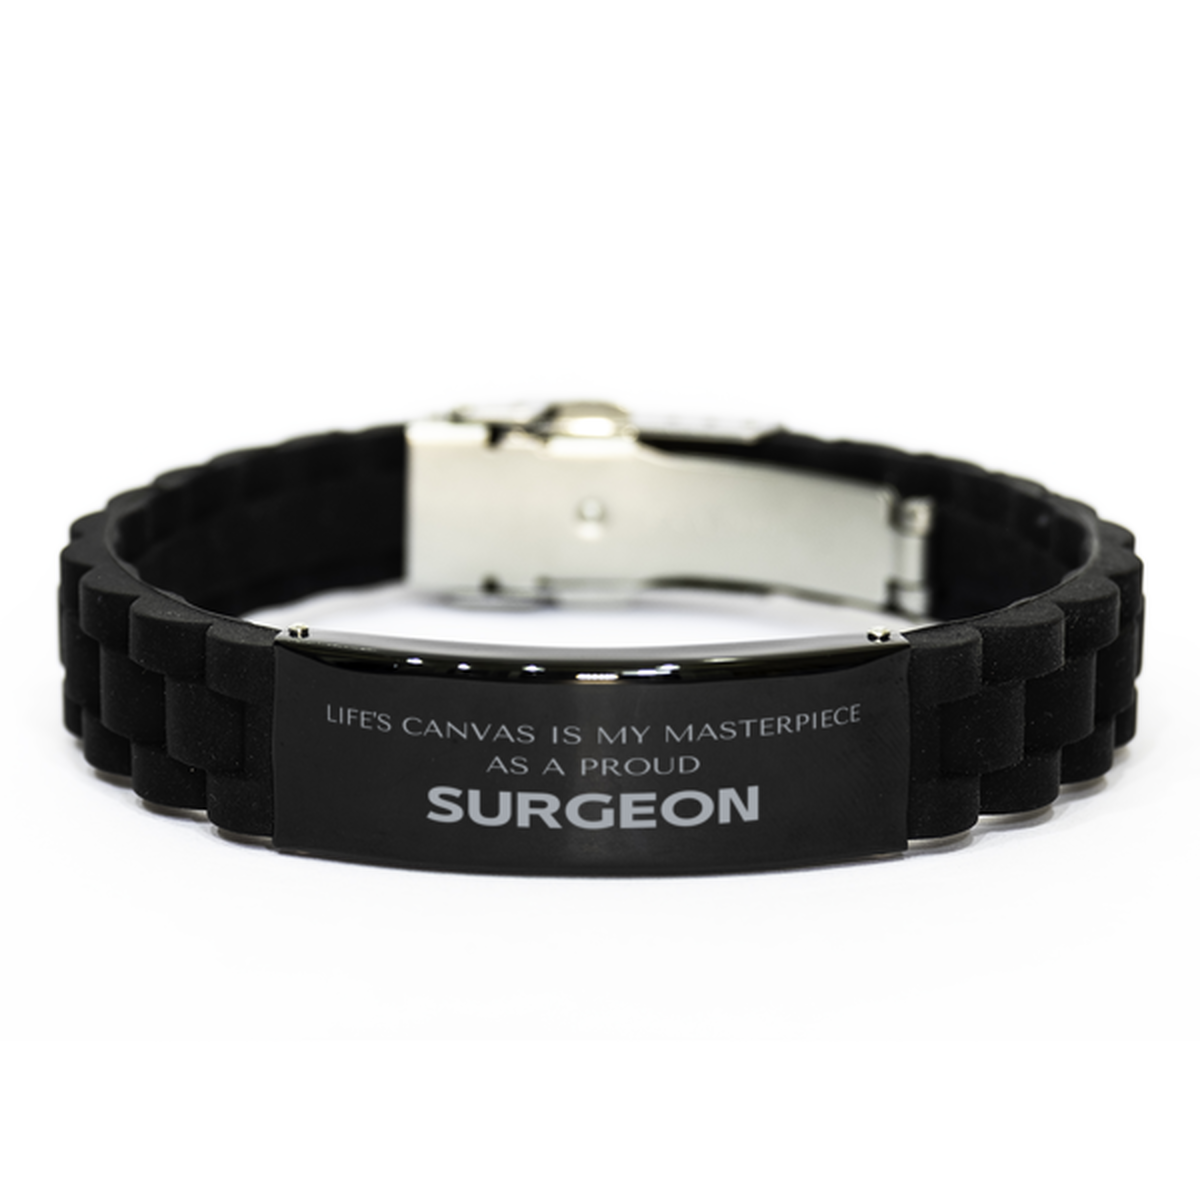 Proud Surgeon Gifts, Life's canvas is my masterpiece, Epic Birthday Christmas Unique Black Glidelock Clasp Bracelet For Surgeon, Coworkers, Men, Women, Friends